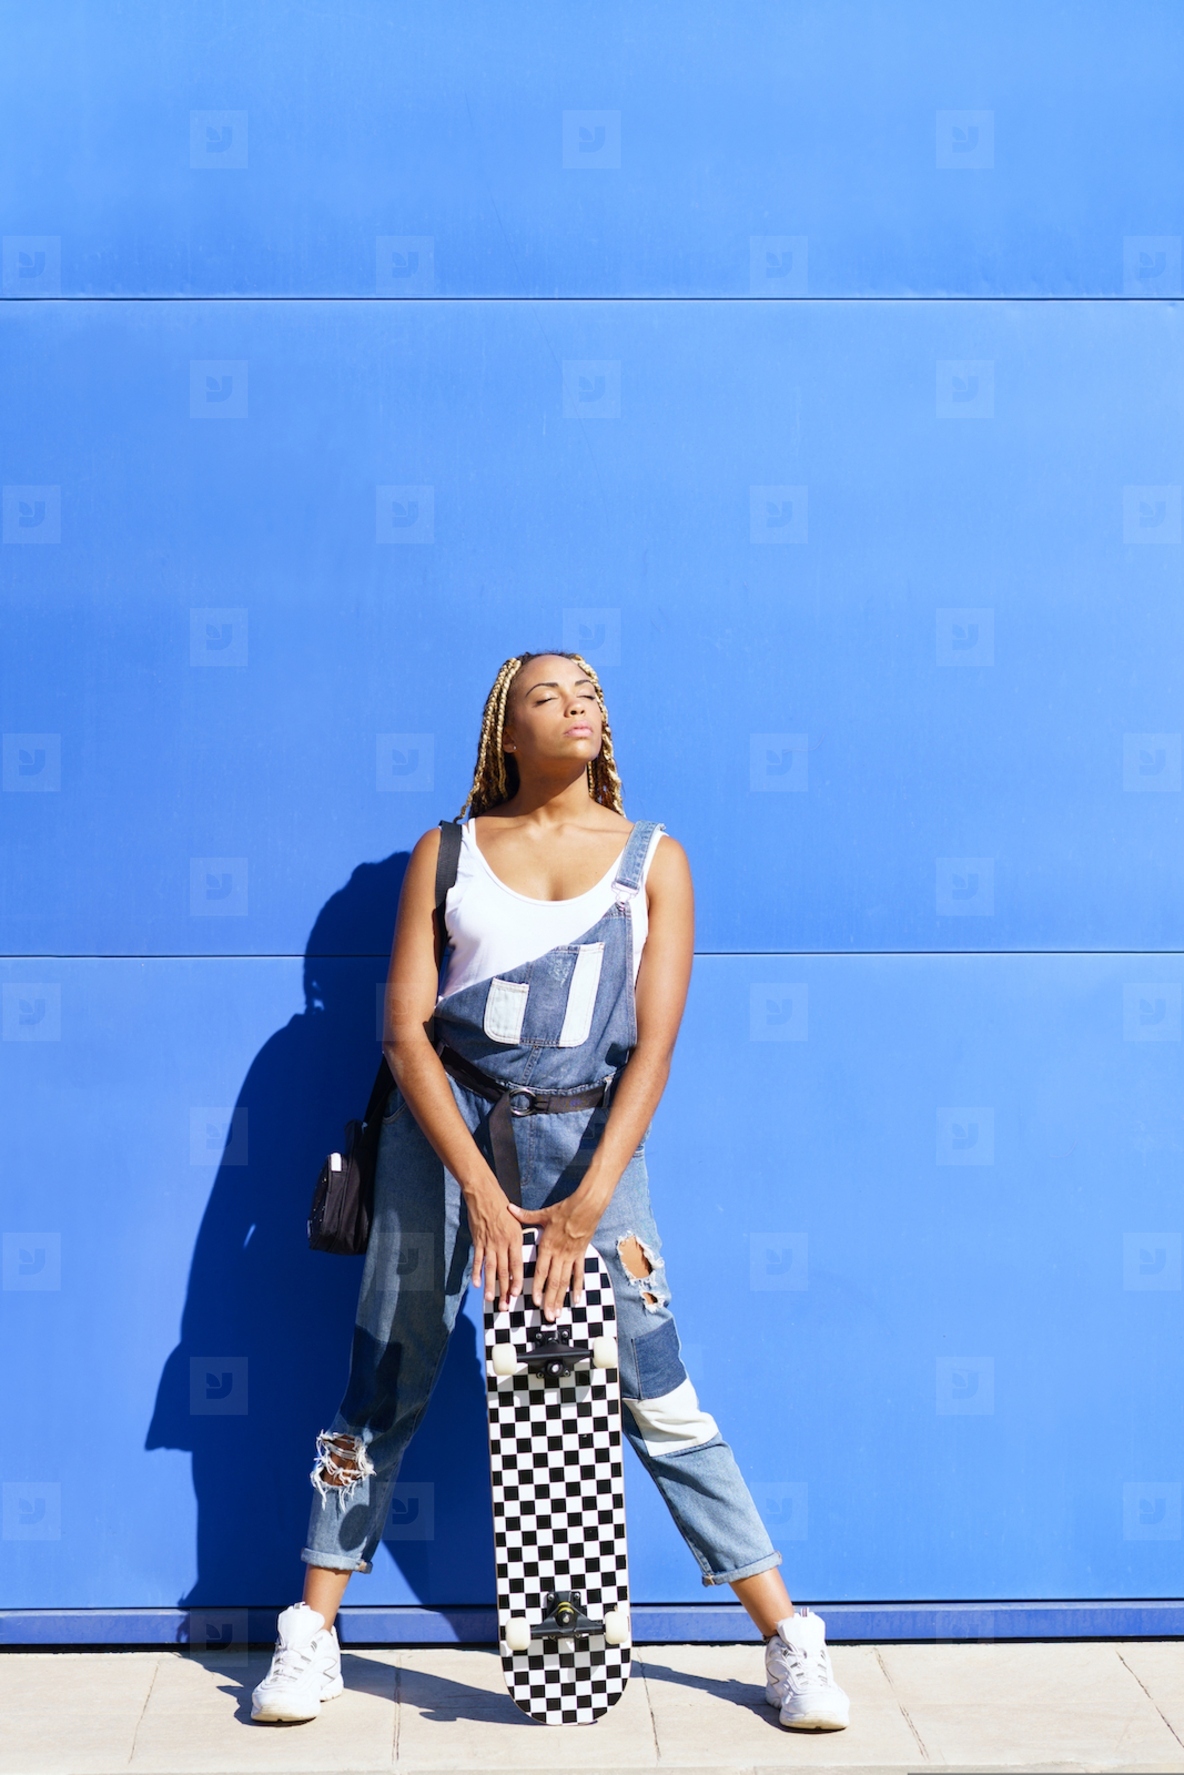 Black girl dressed casual  wtih a skateboard on blue wall background